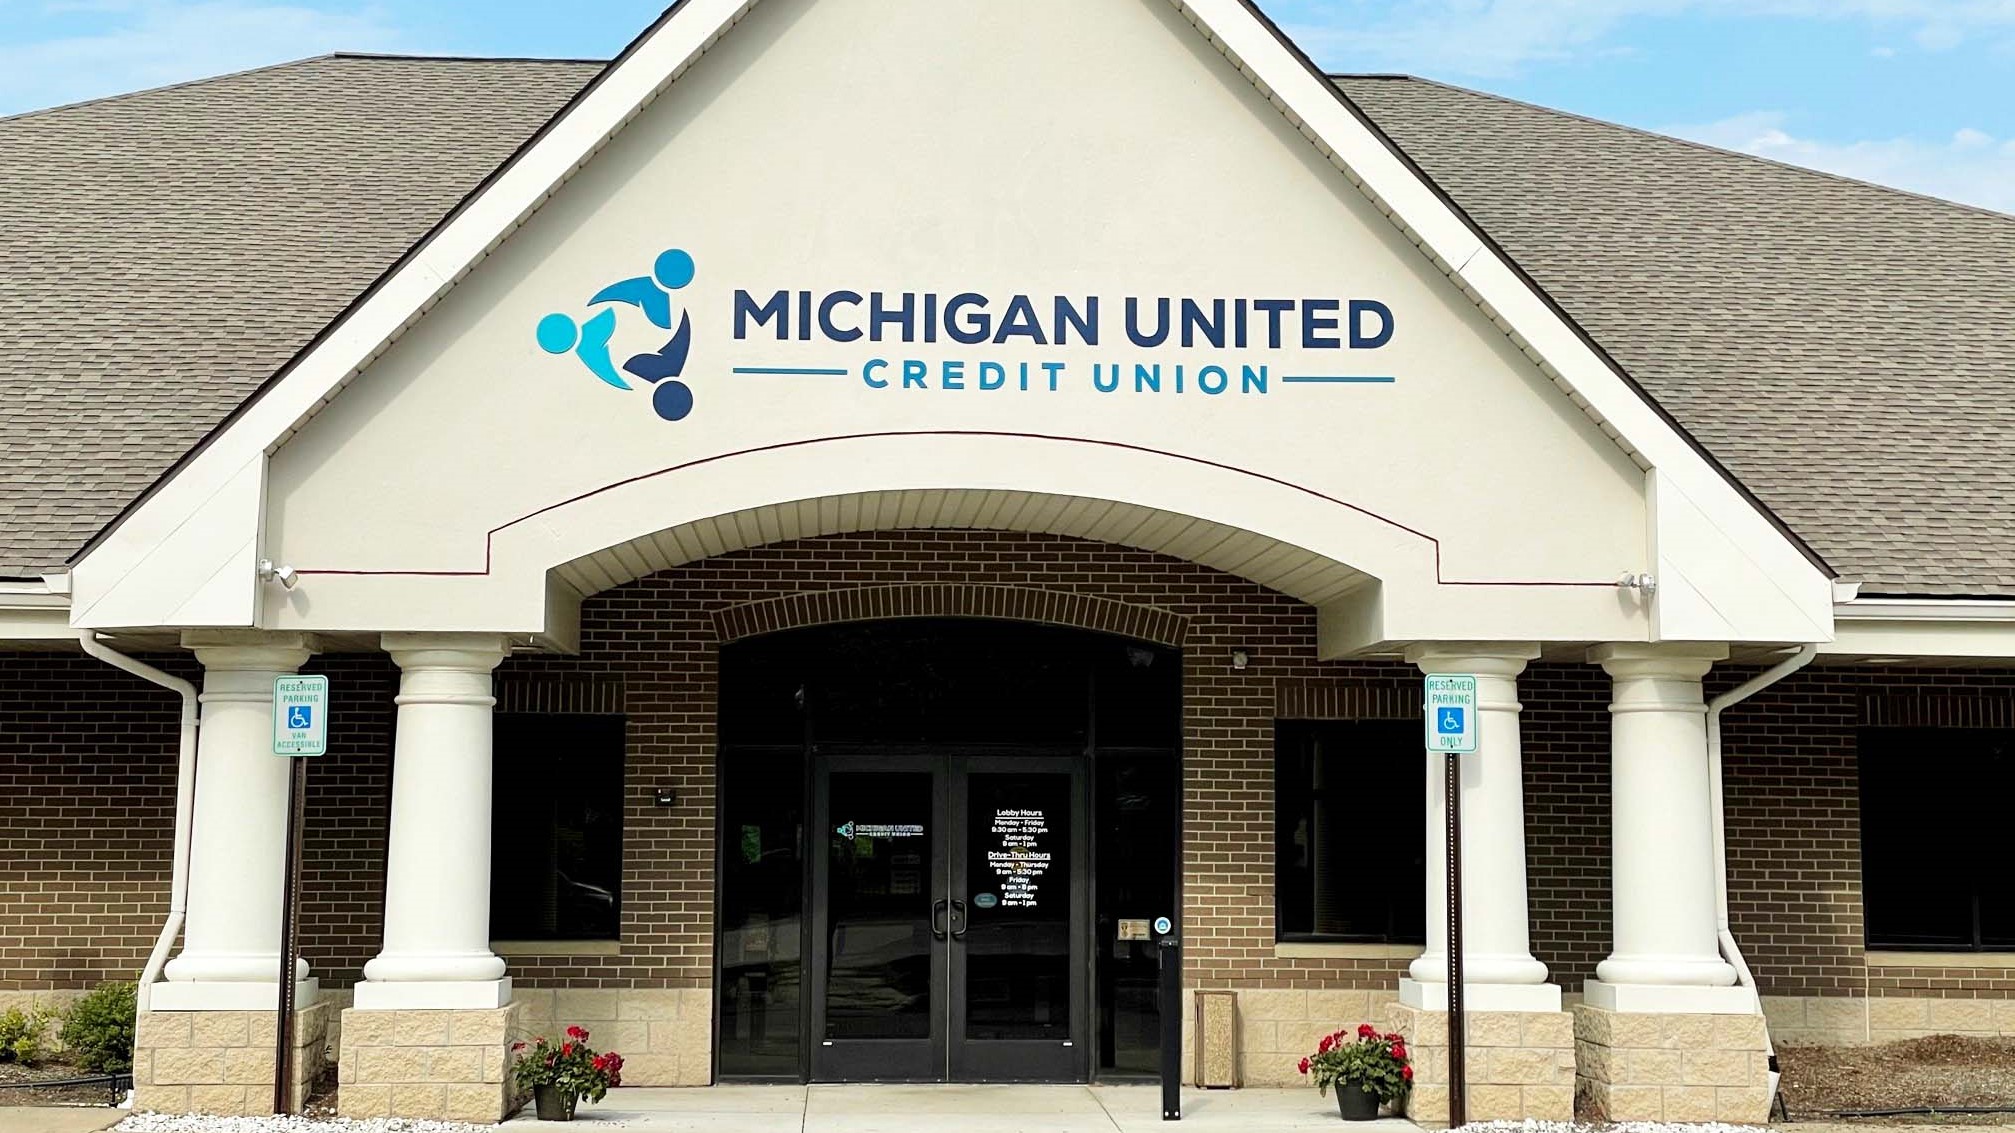 Lake Orion Branch location